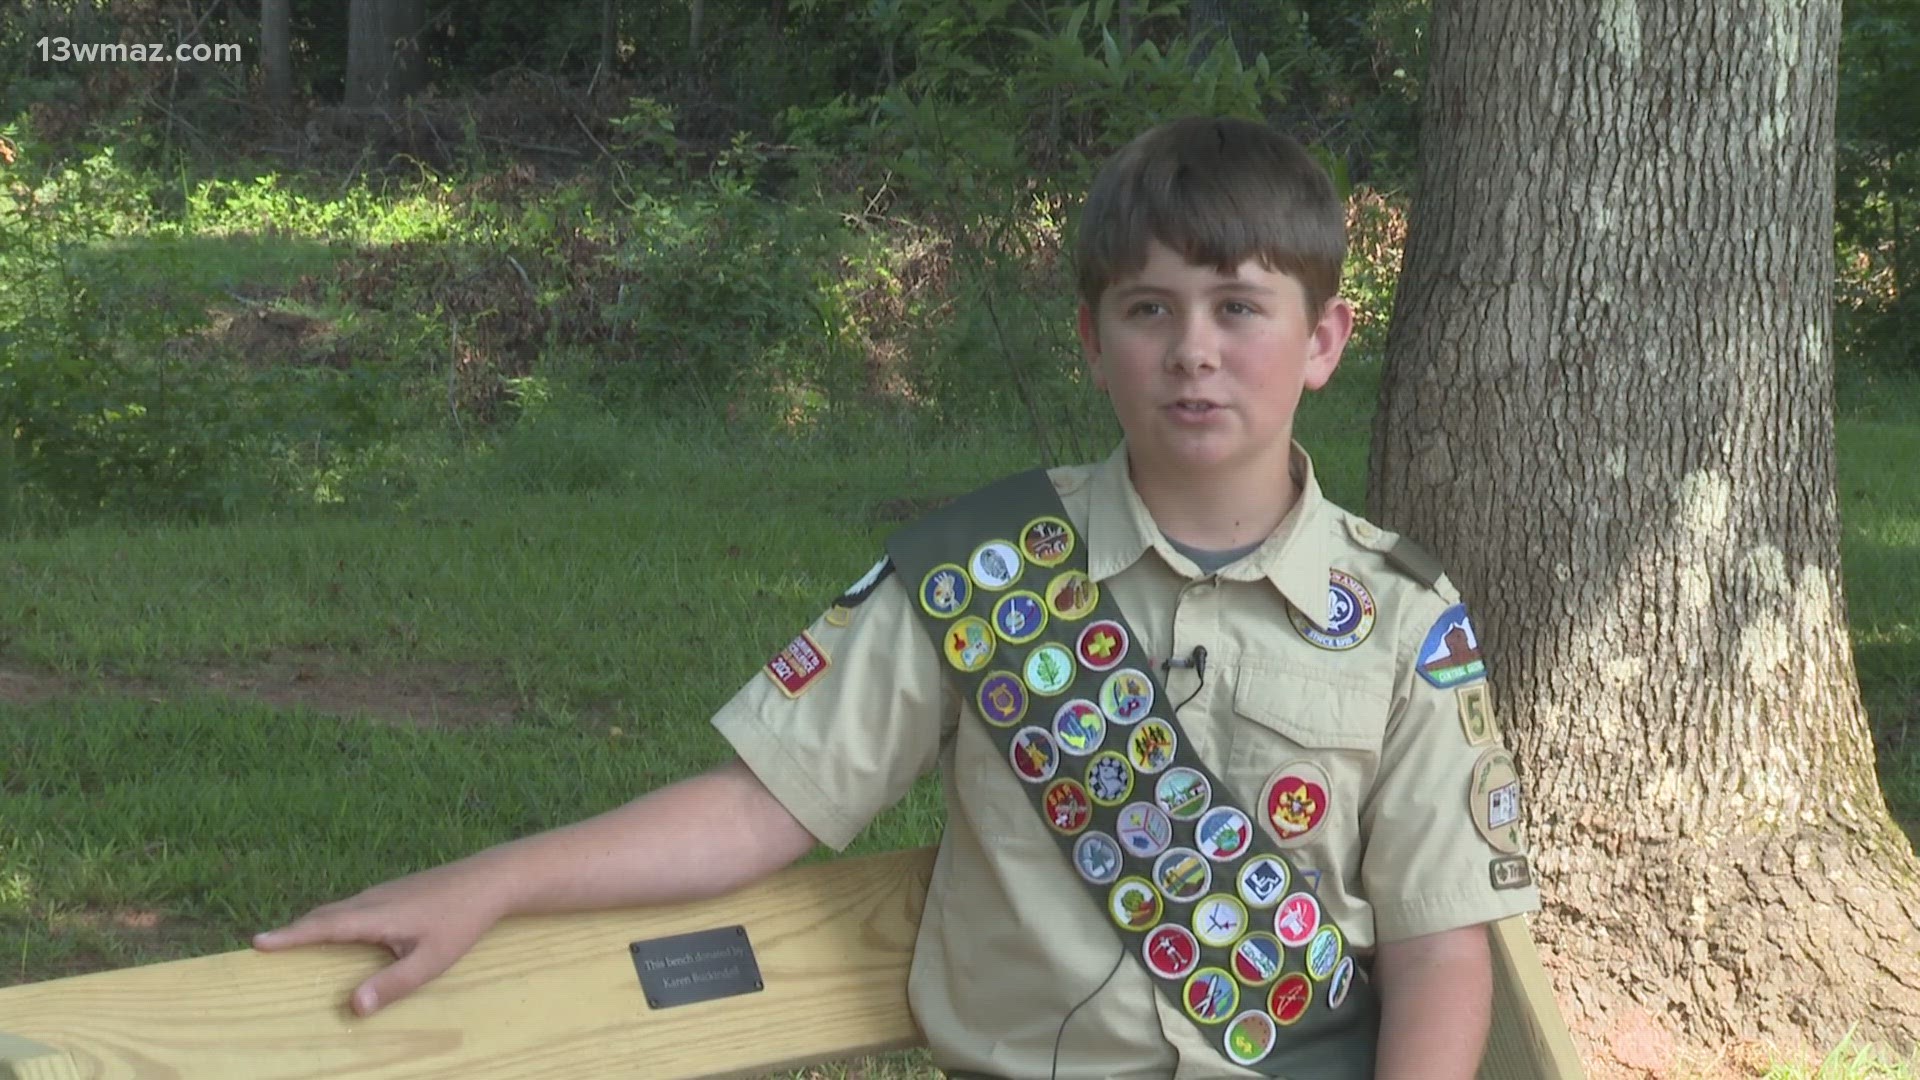 An eighth grade eagle scout gives early g